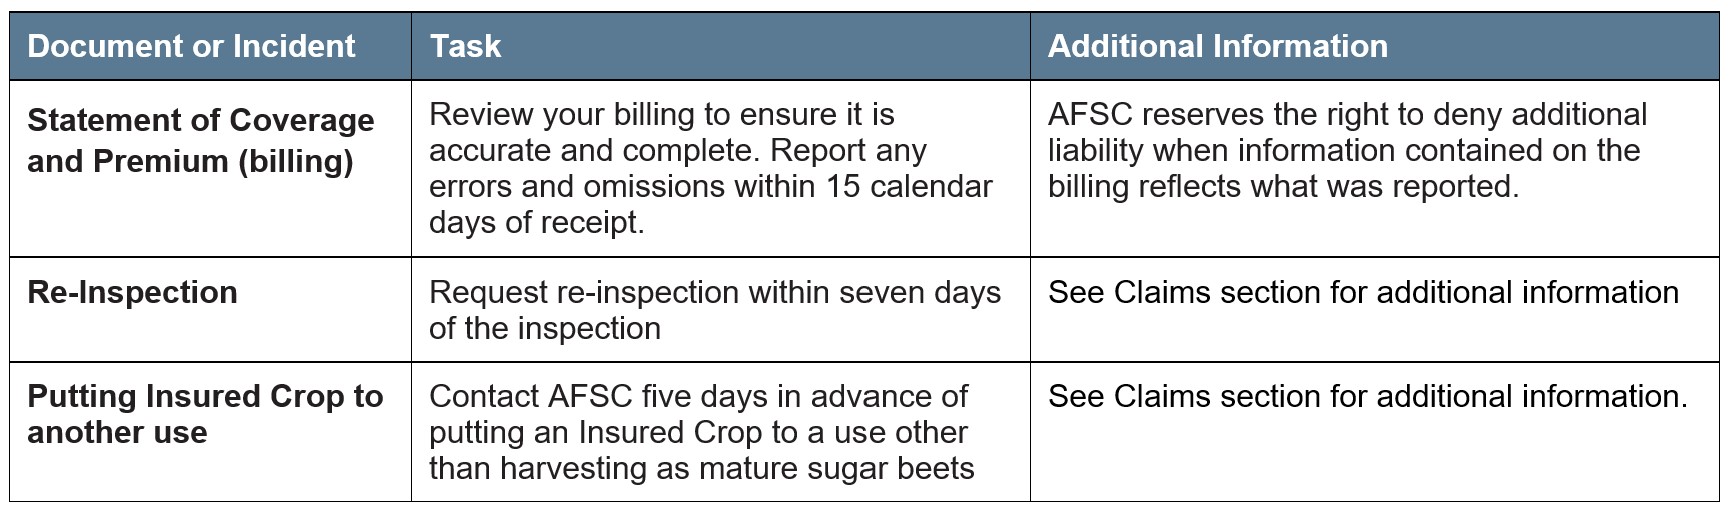 Sugar Beets Article 4 Other Deadlines. Call AFSC for details